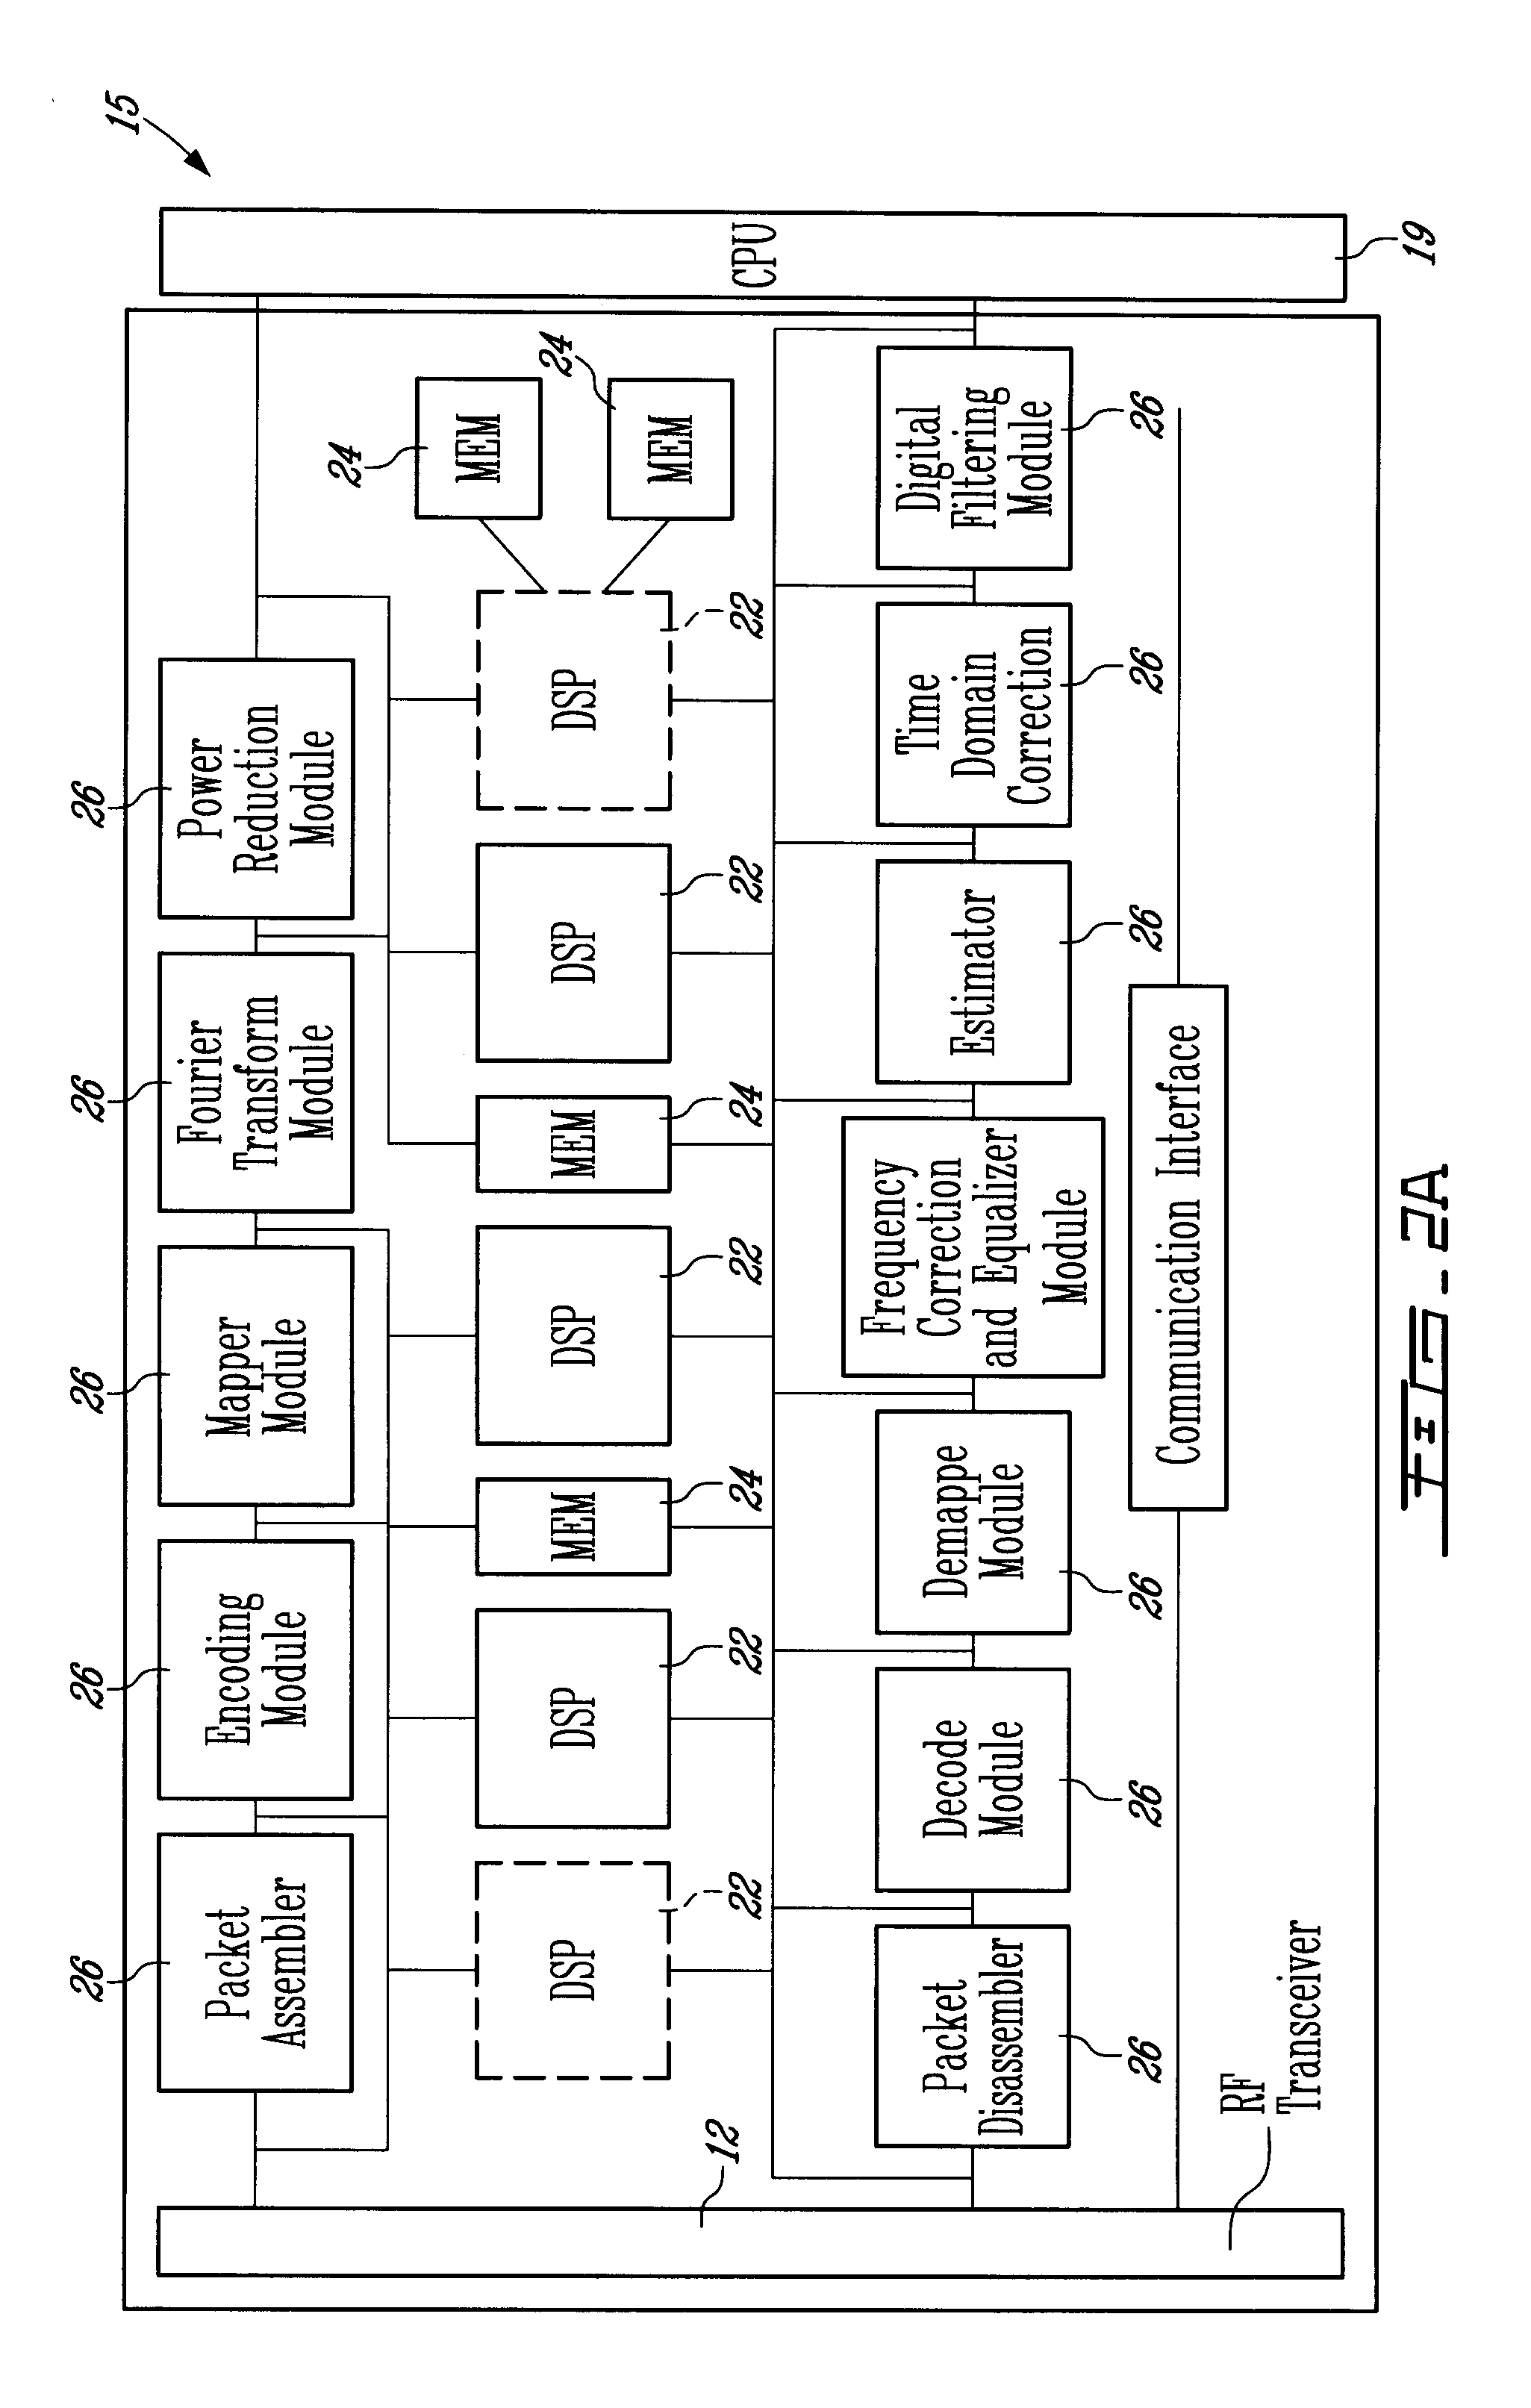 Signal processing unit and method, and corresponding transceiver